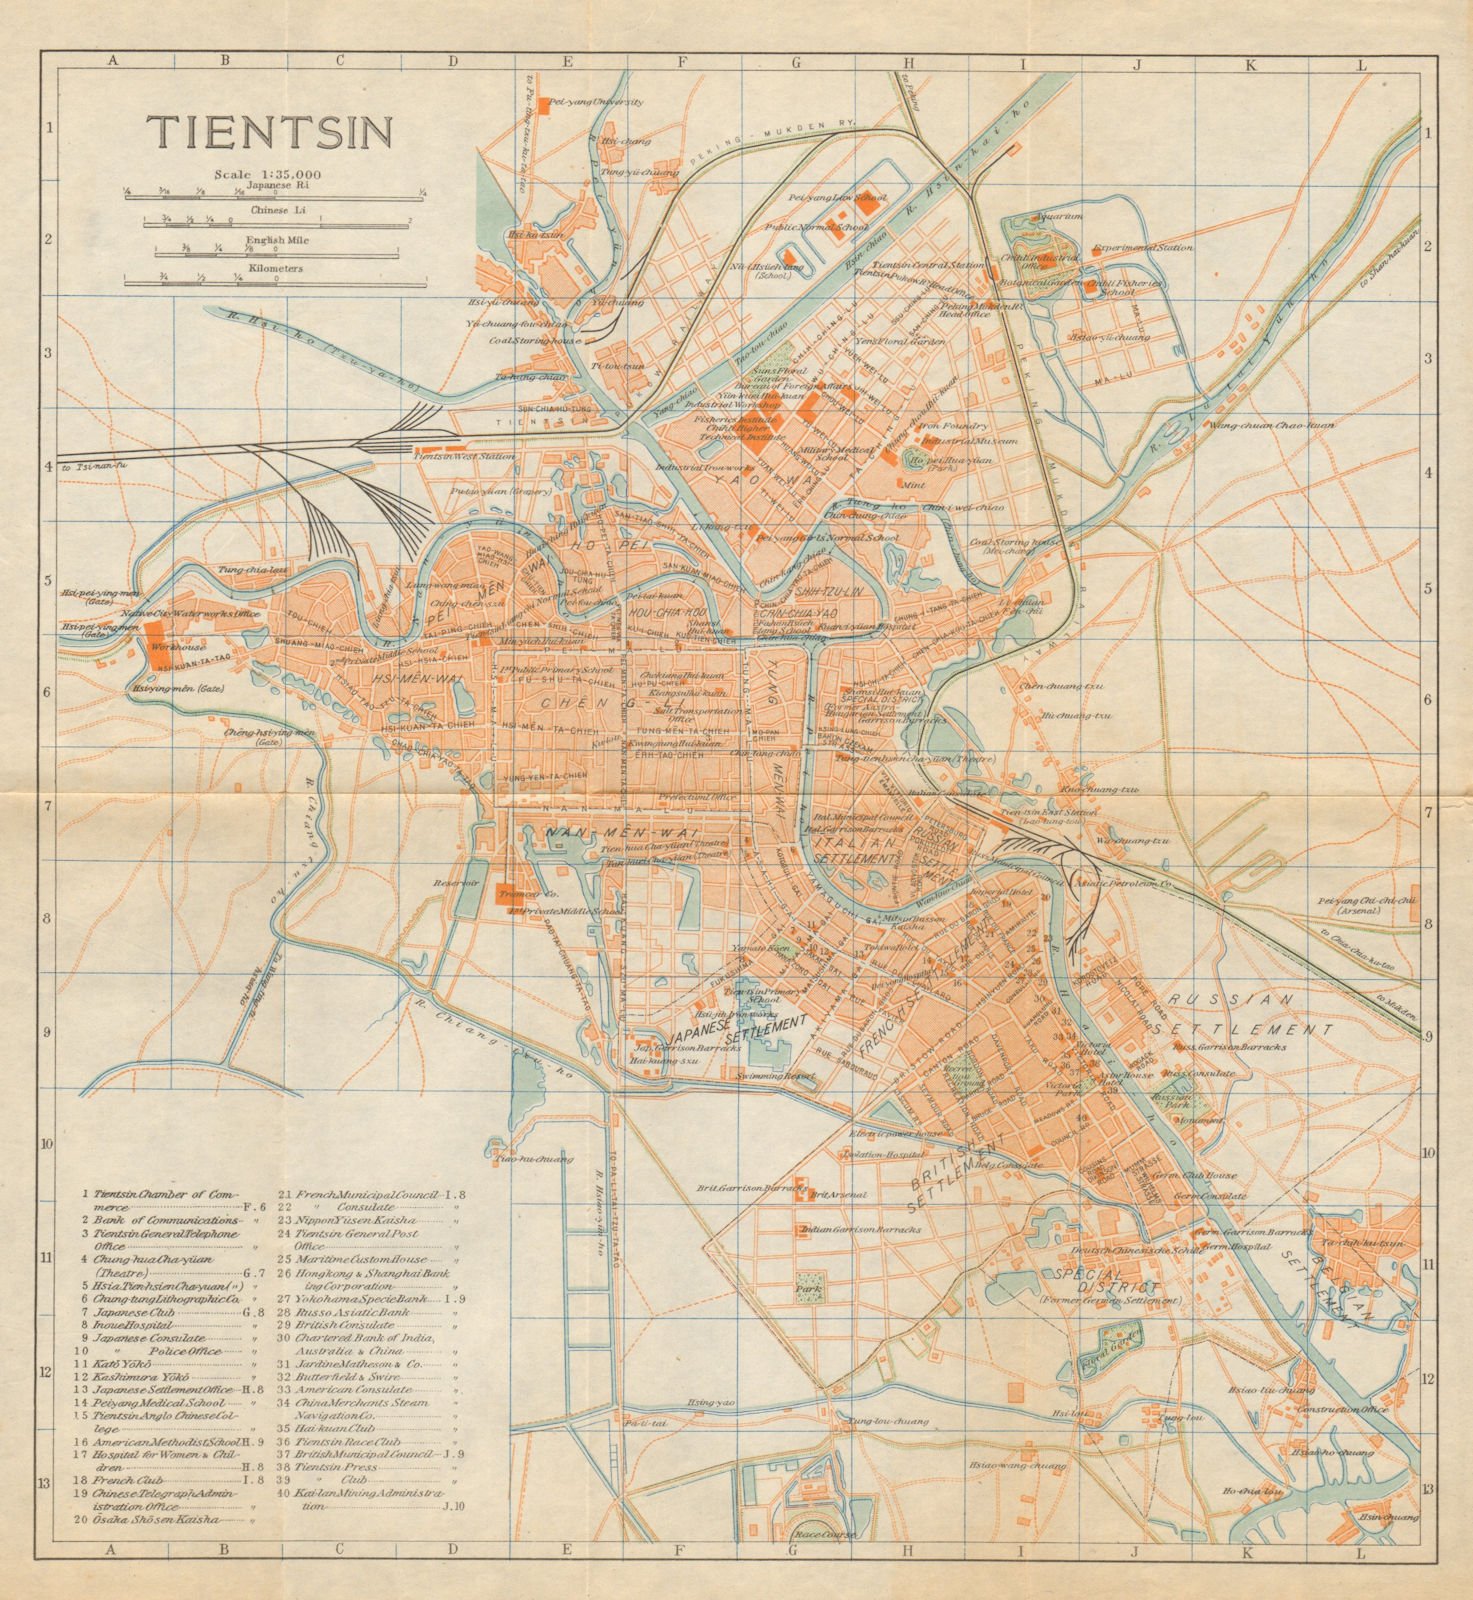 Associate Product 'Tientsin'. Tianjin antique town city plan. China 1924 old map chart